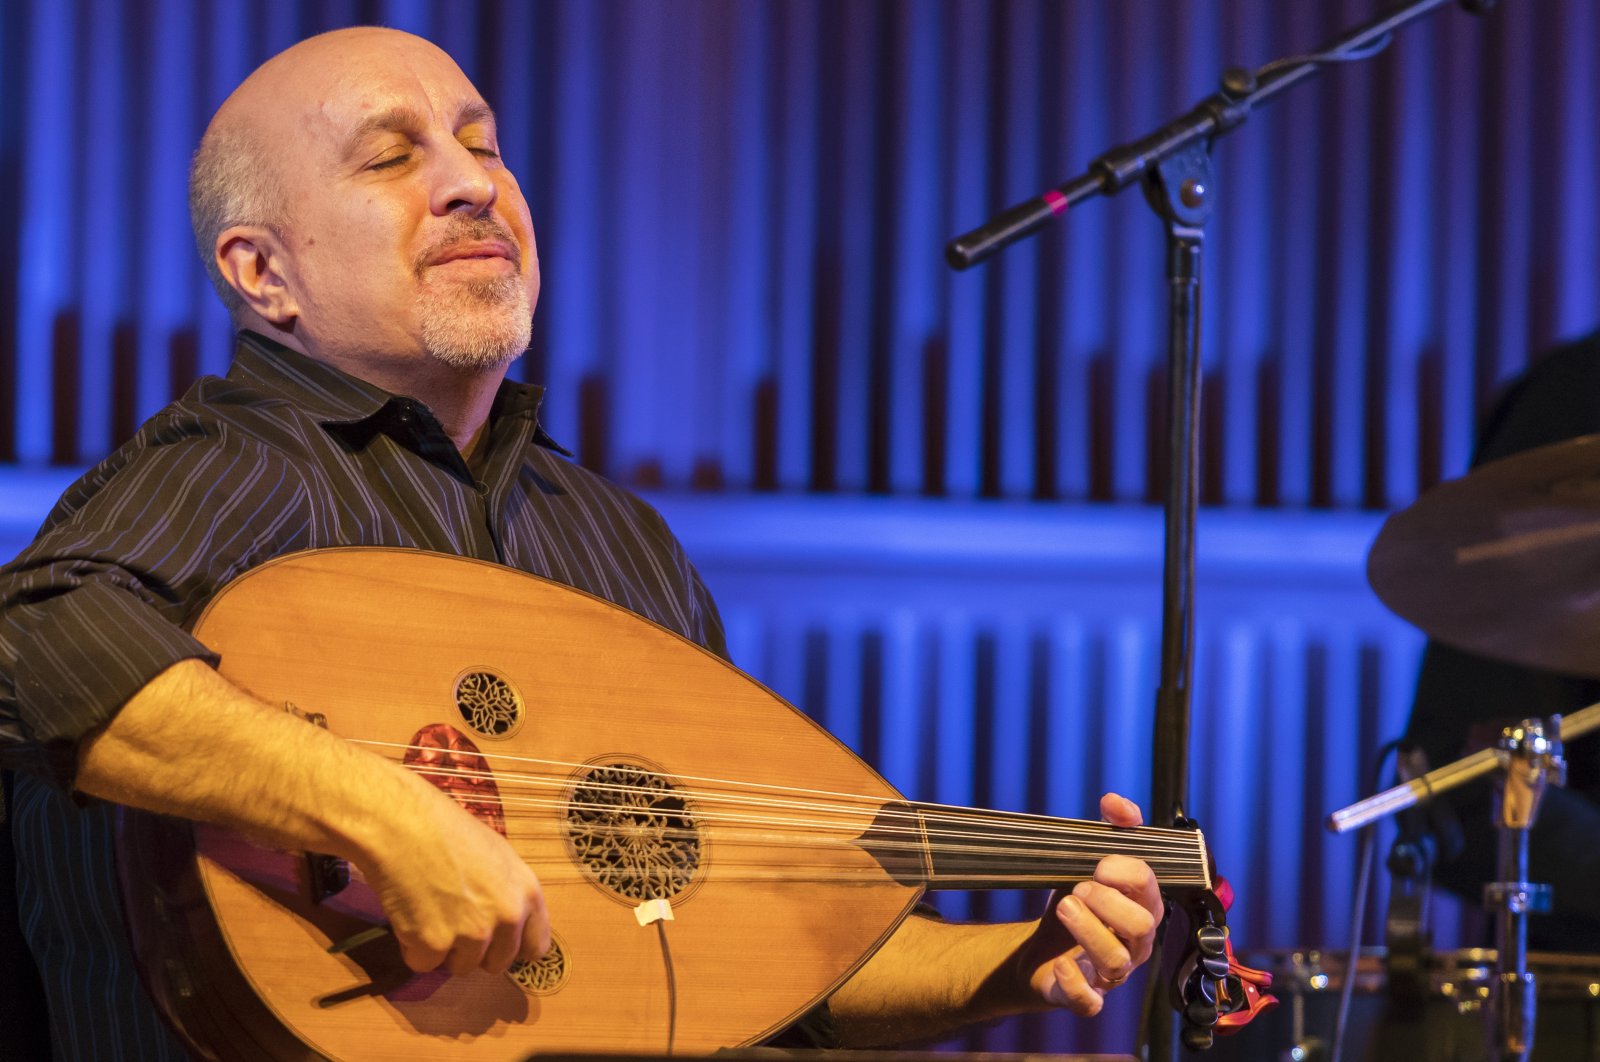 Armenian-American musician Ara Dinkjian plays oud as he leads his ensemble during a Live Sounds program of &quot;Songs of Armenia and Anatolia&quot; during the Live (at) 365 global music series at the Graduate Center of the City University of New York&#039;s Elebash Recital Hall, New York, New York, Feb. 24, 2017. (Getty Images Photo)